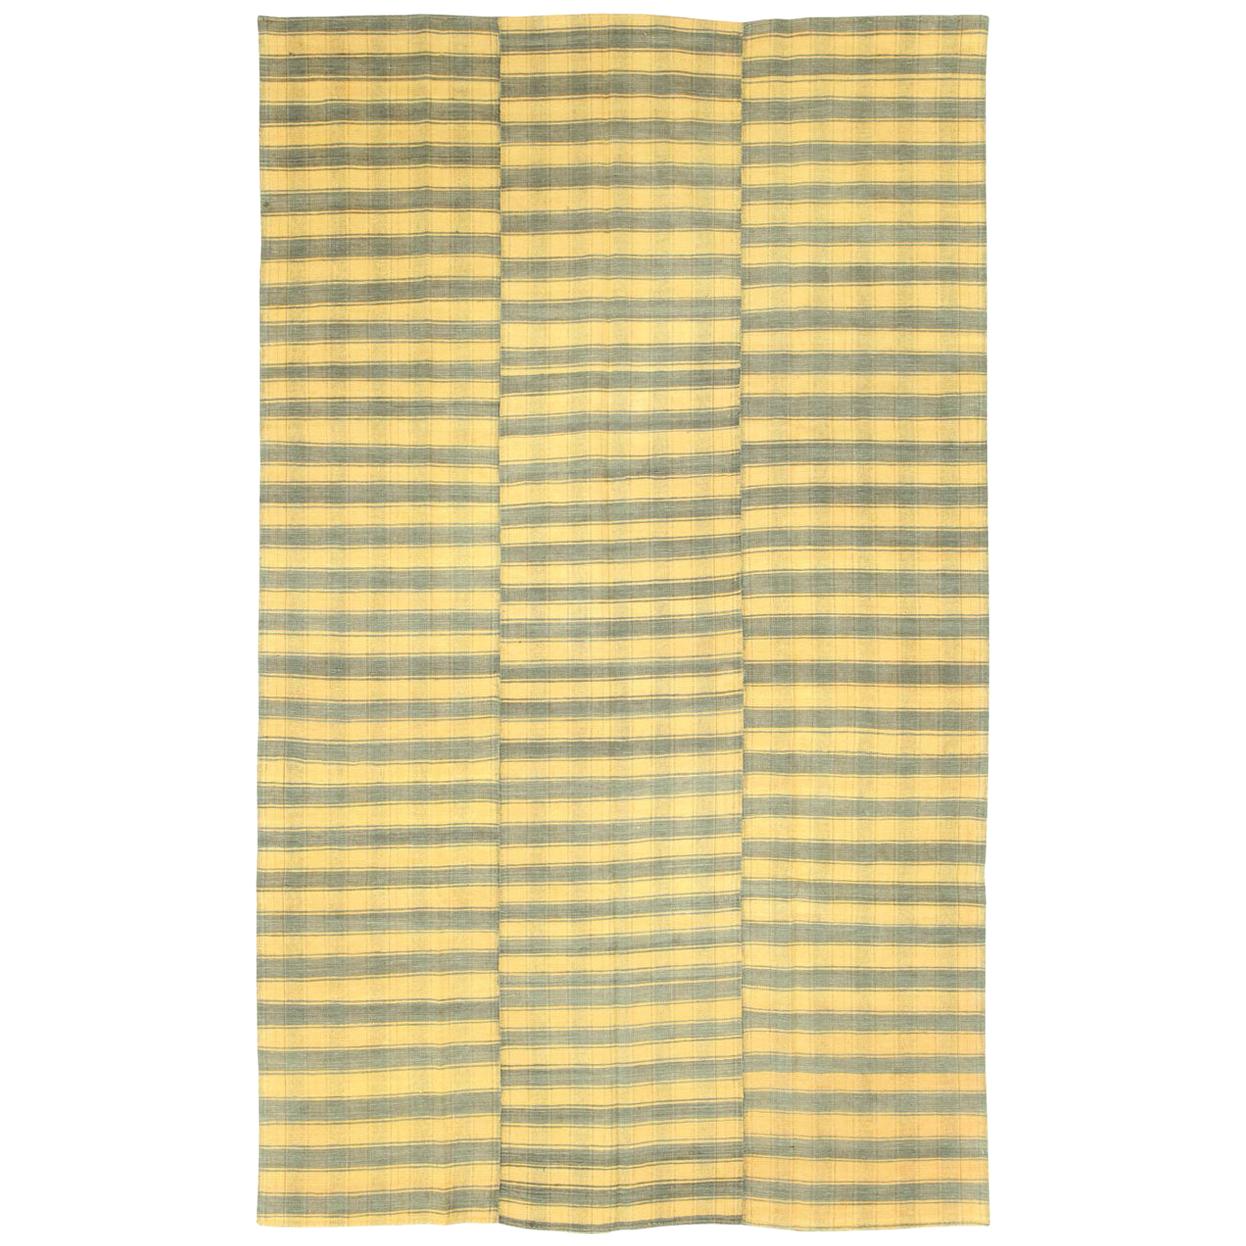 Mid-20th Century Small Room Size Turkish Flat-Weave Kilim Accent Rug in Yellow For Sale